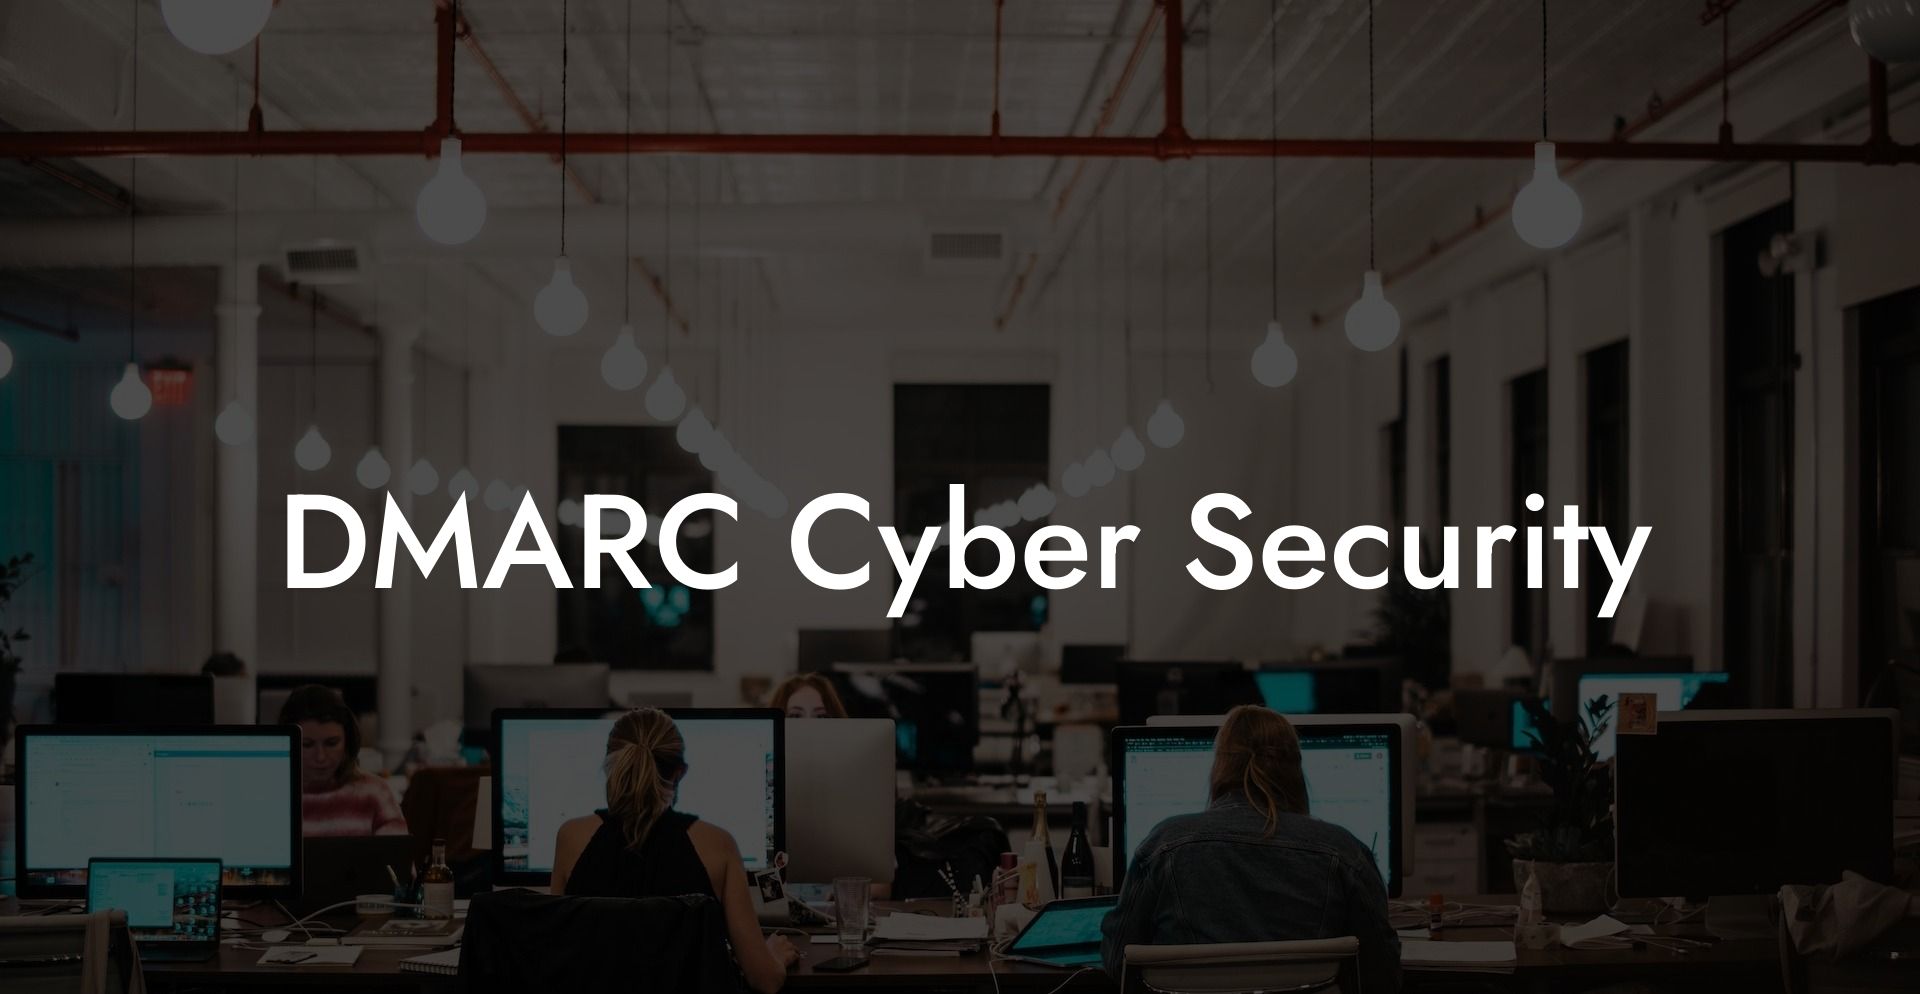 DMARC Cyber Security